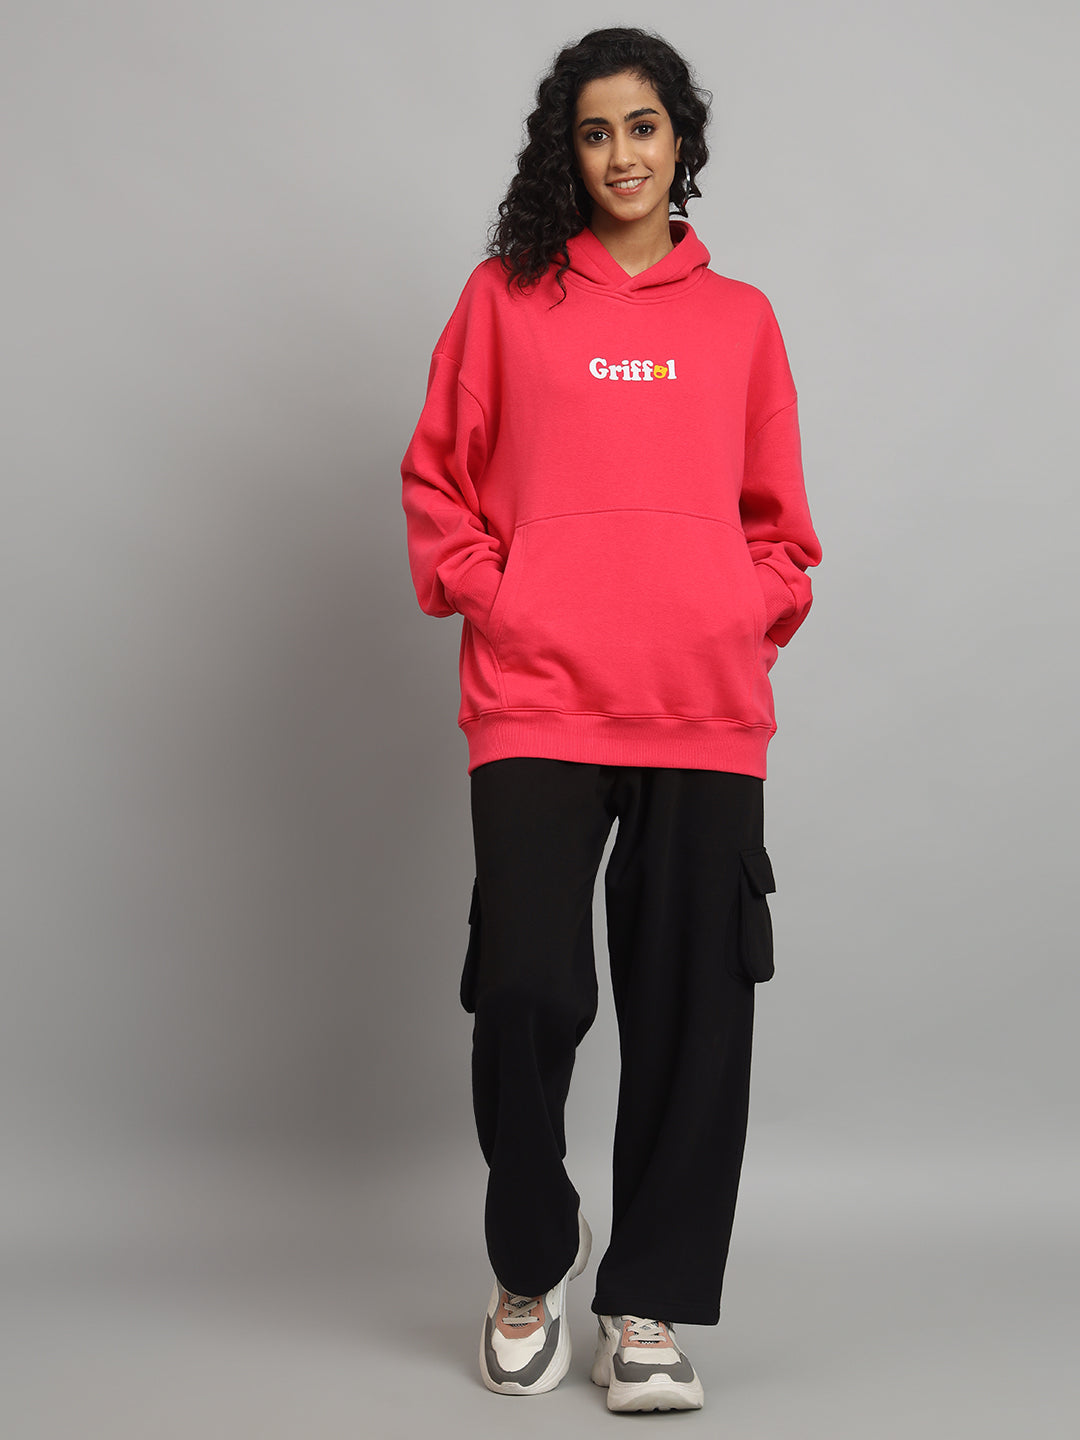 HOW DO I Print Oversized Tracksuit - griffel